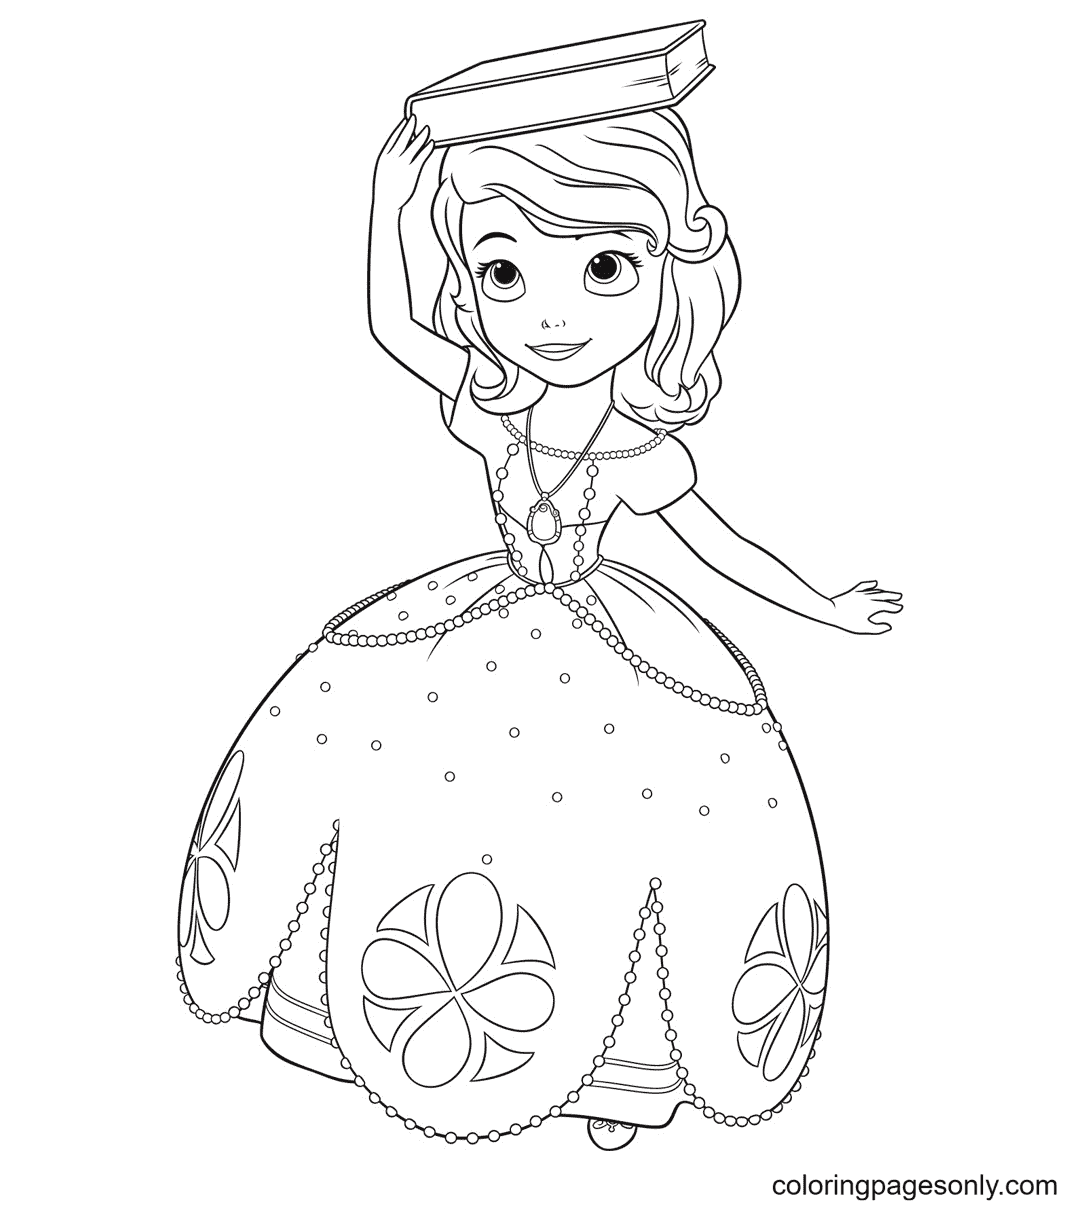 Princess Sofia With A Book On Her Head Coloring Pages